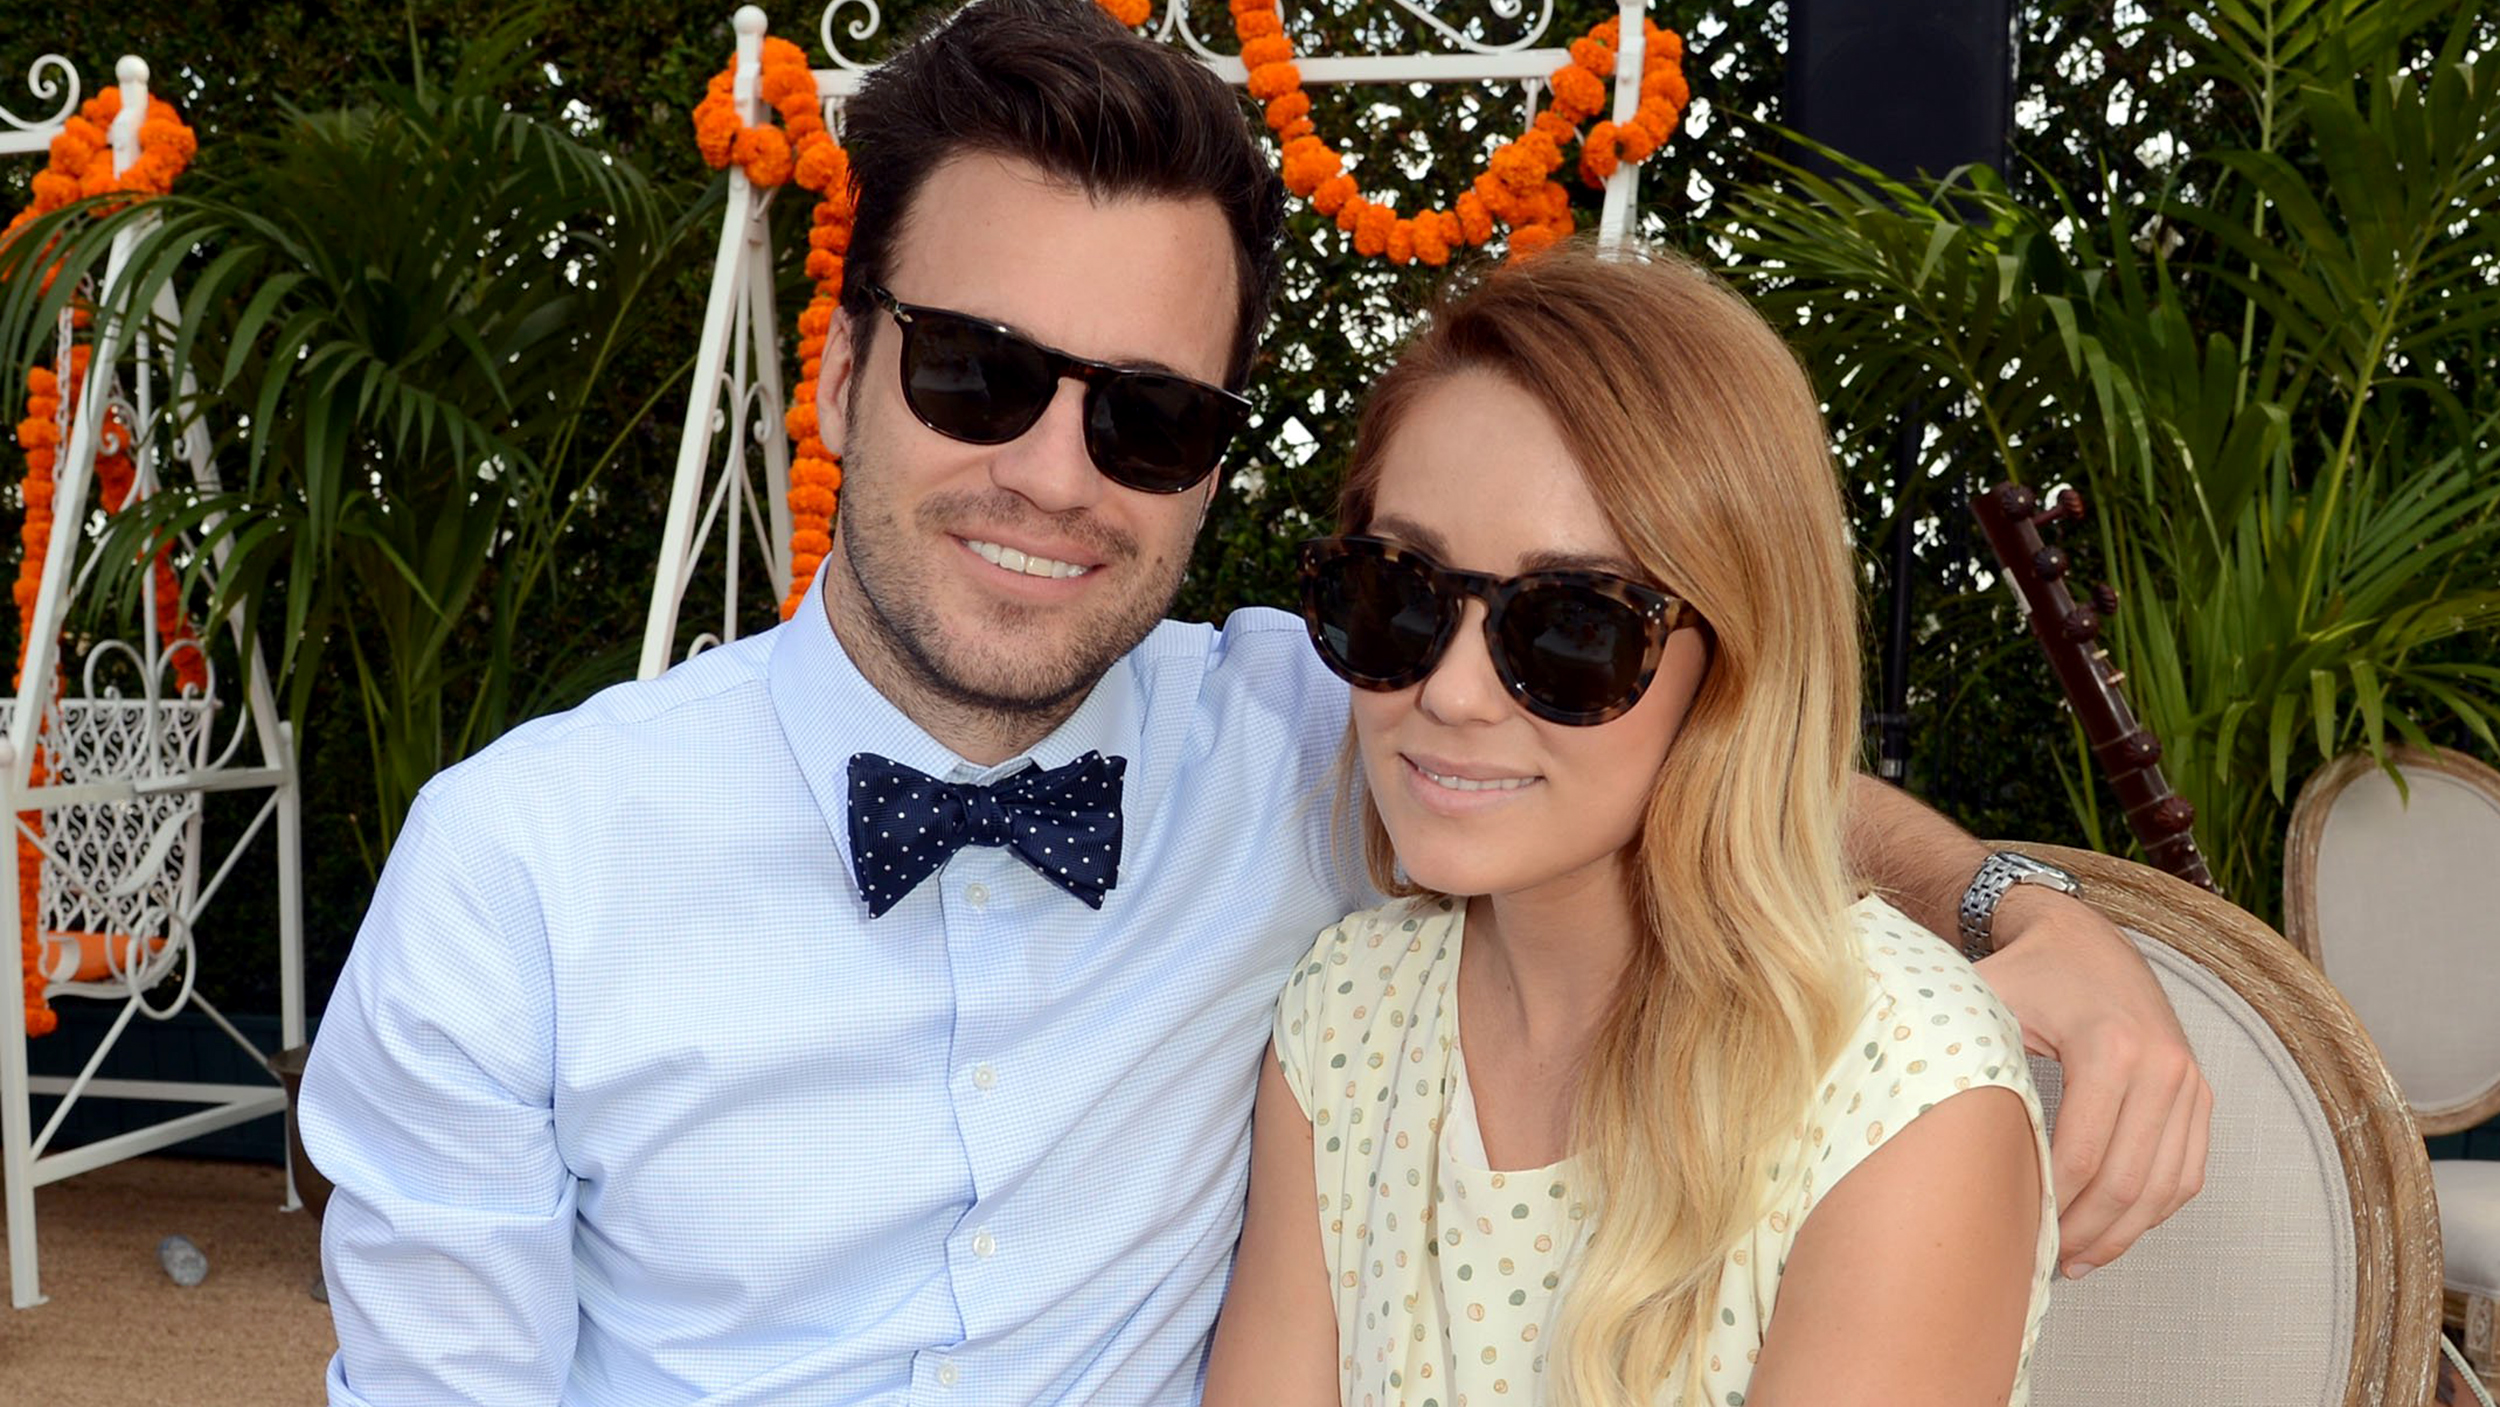 Woop, woop! Lauren Conrad and husband William Tell are expecting